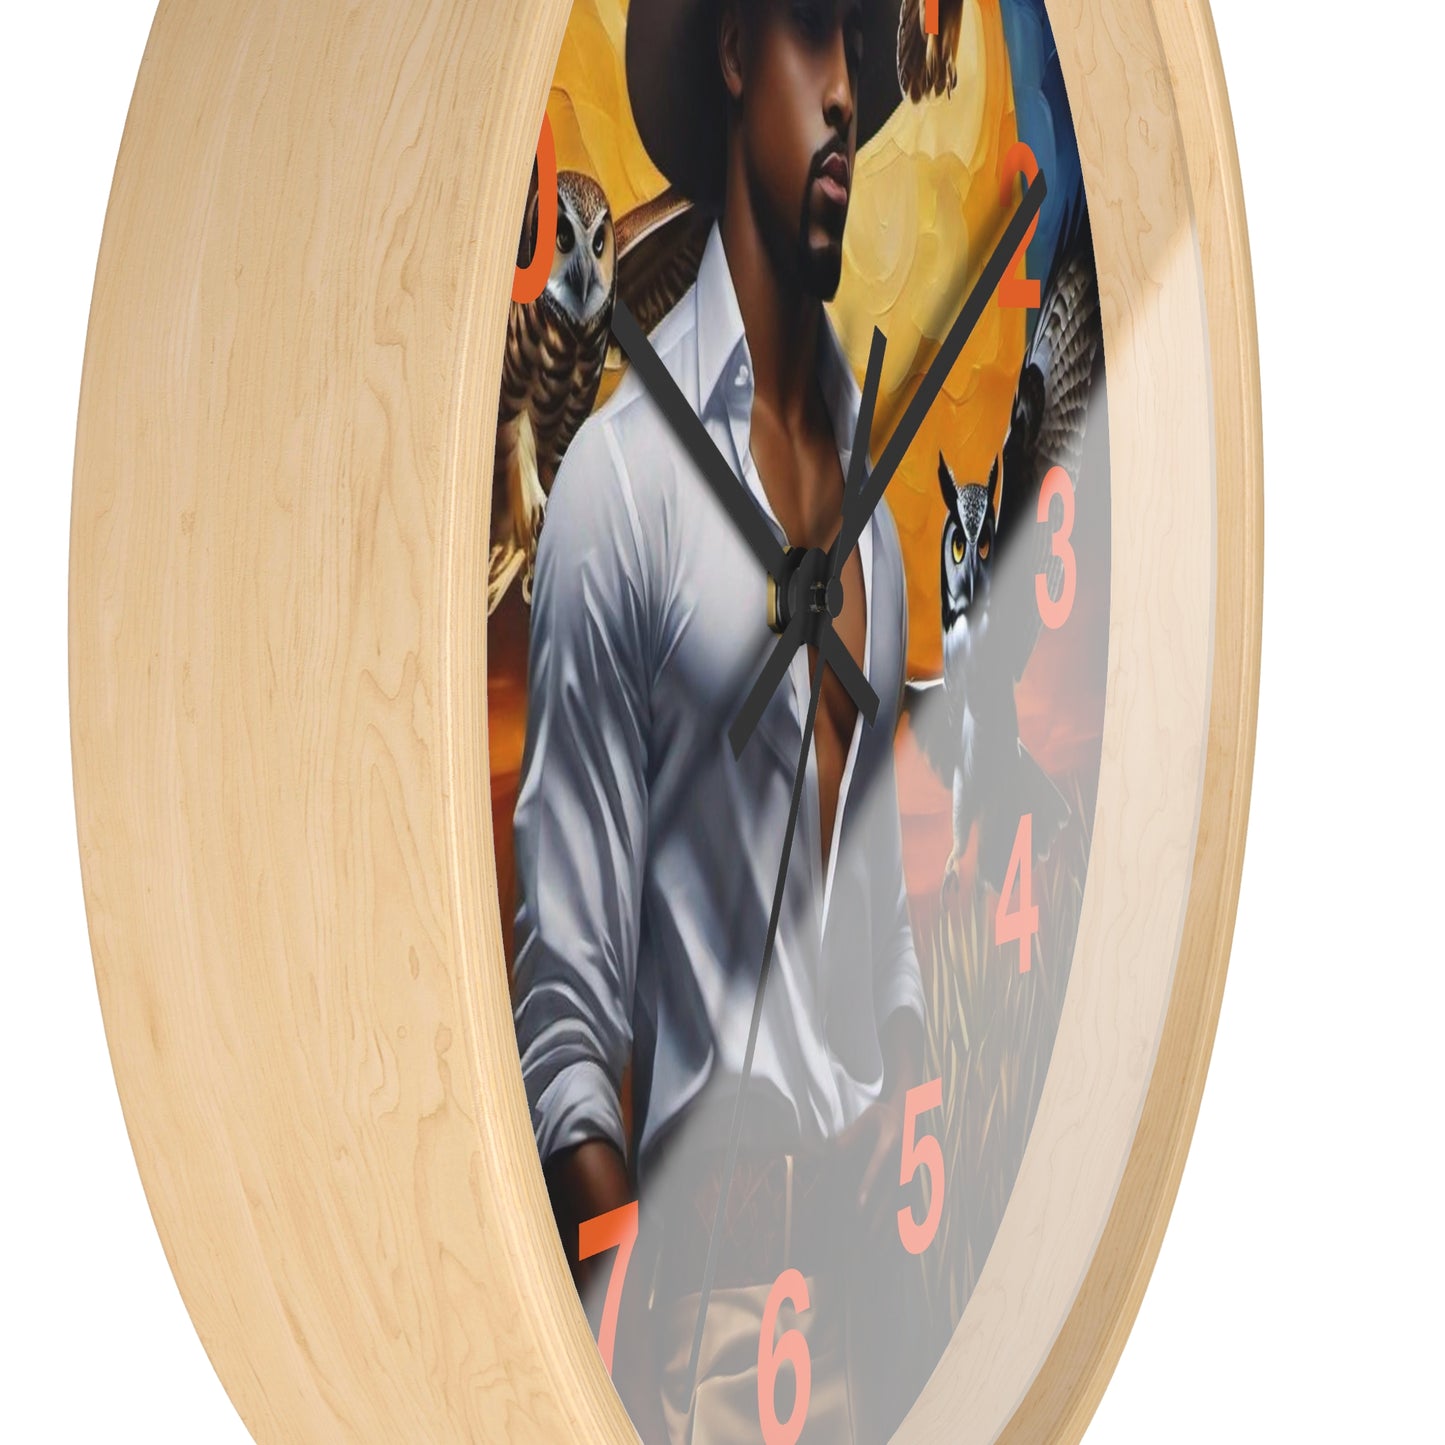 R&RH The Man and Owls Wall Clock